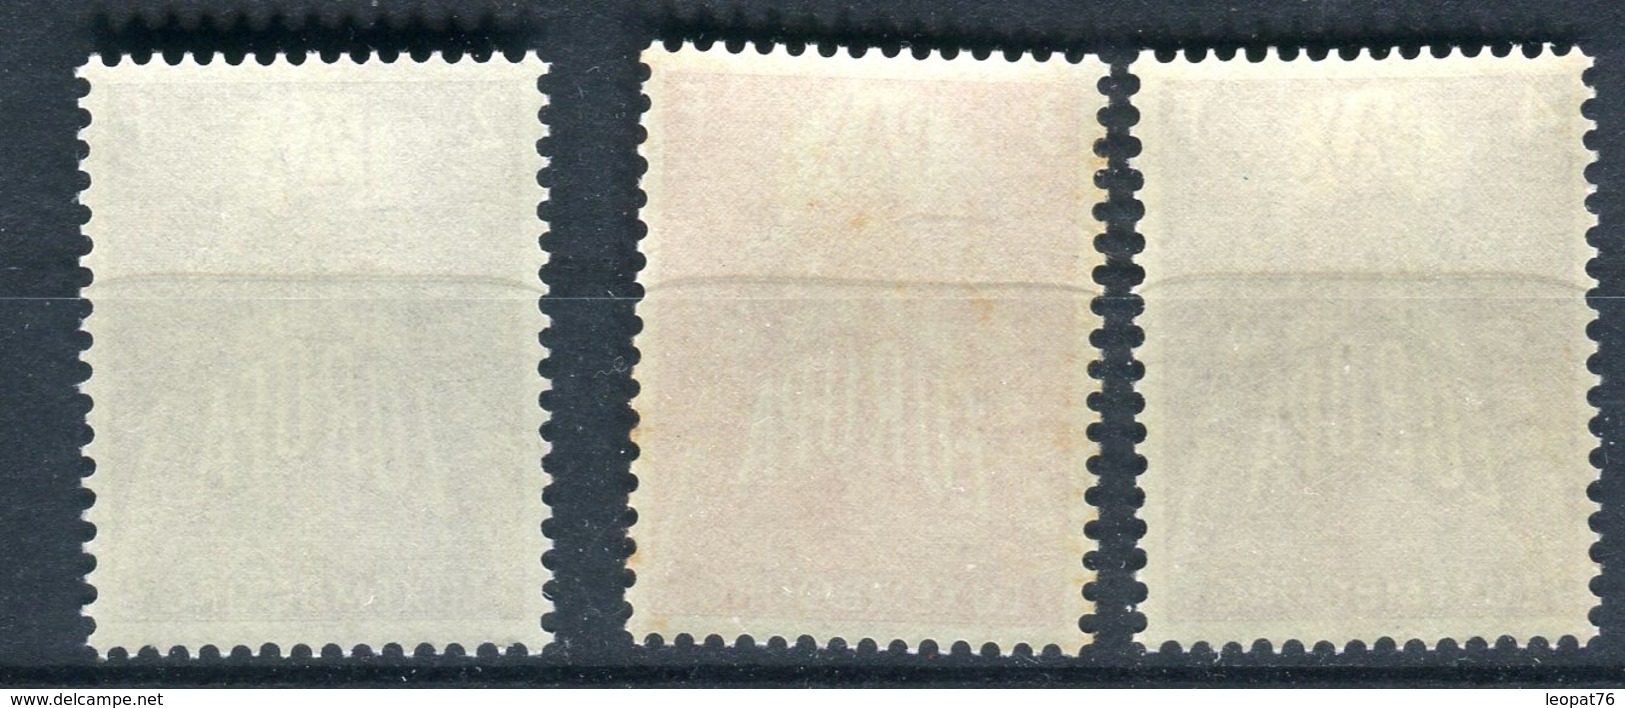 Luxembourg - N° Yvert 531/533 - Europa - Neuf  **  - 1 Exemplaire Infime " Rousseur "  Cote 100€  - O 374 - Unused Stamps